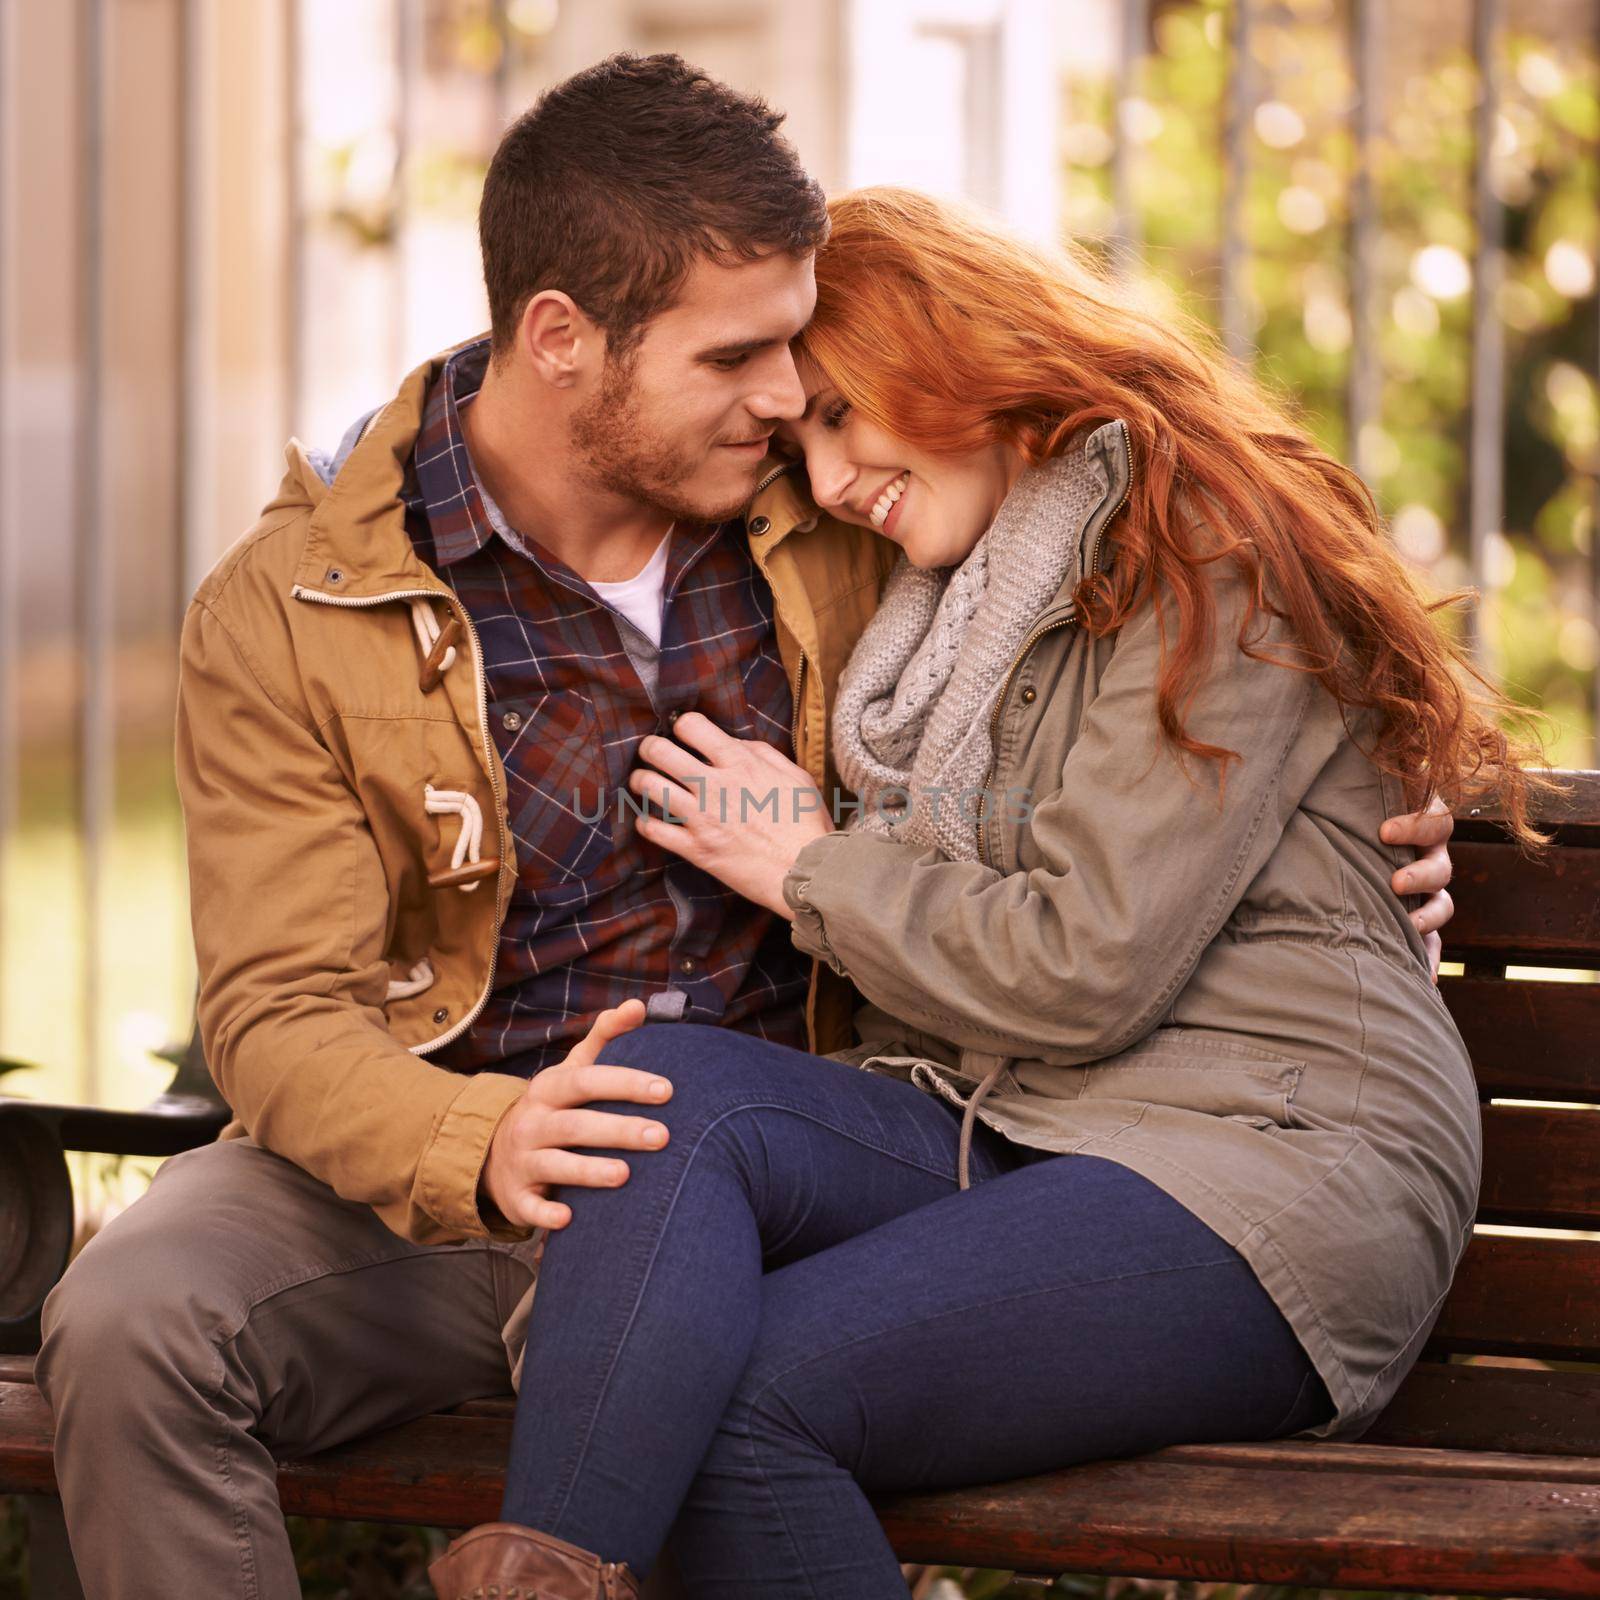 Shot of a happy young couple sharing an affectionate moment on a park bench.